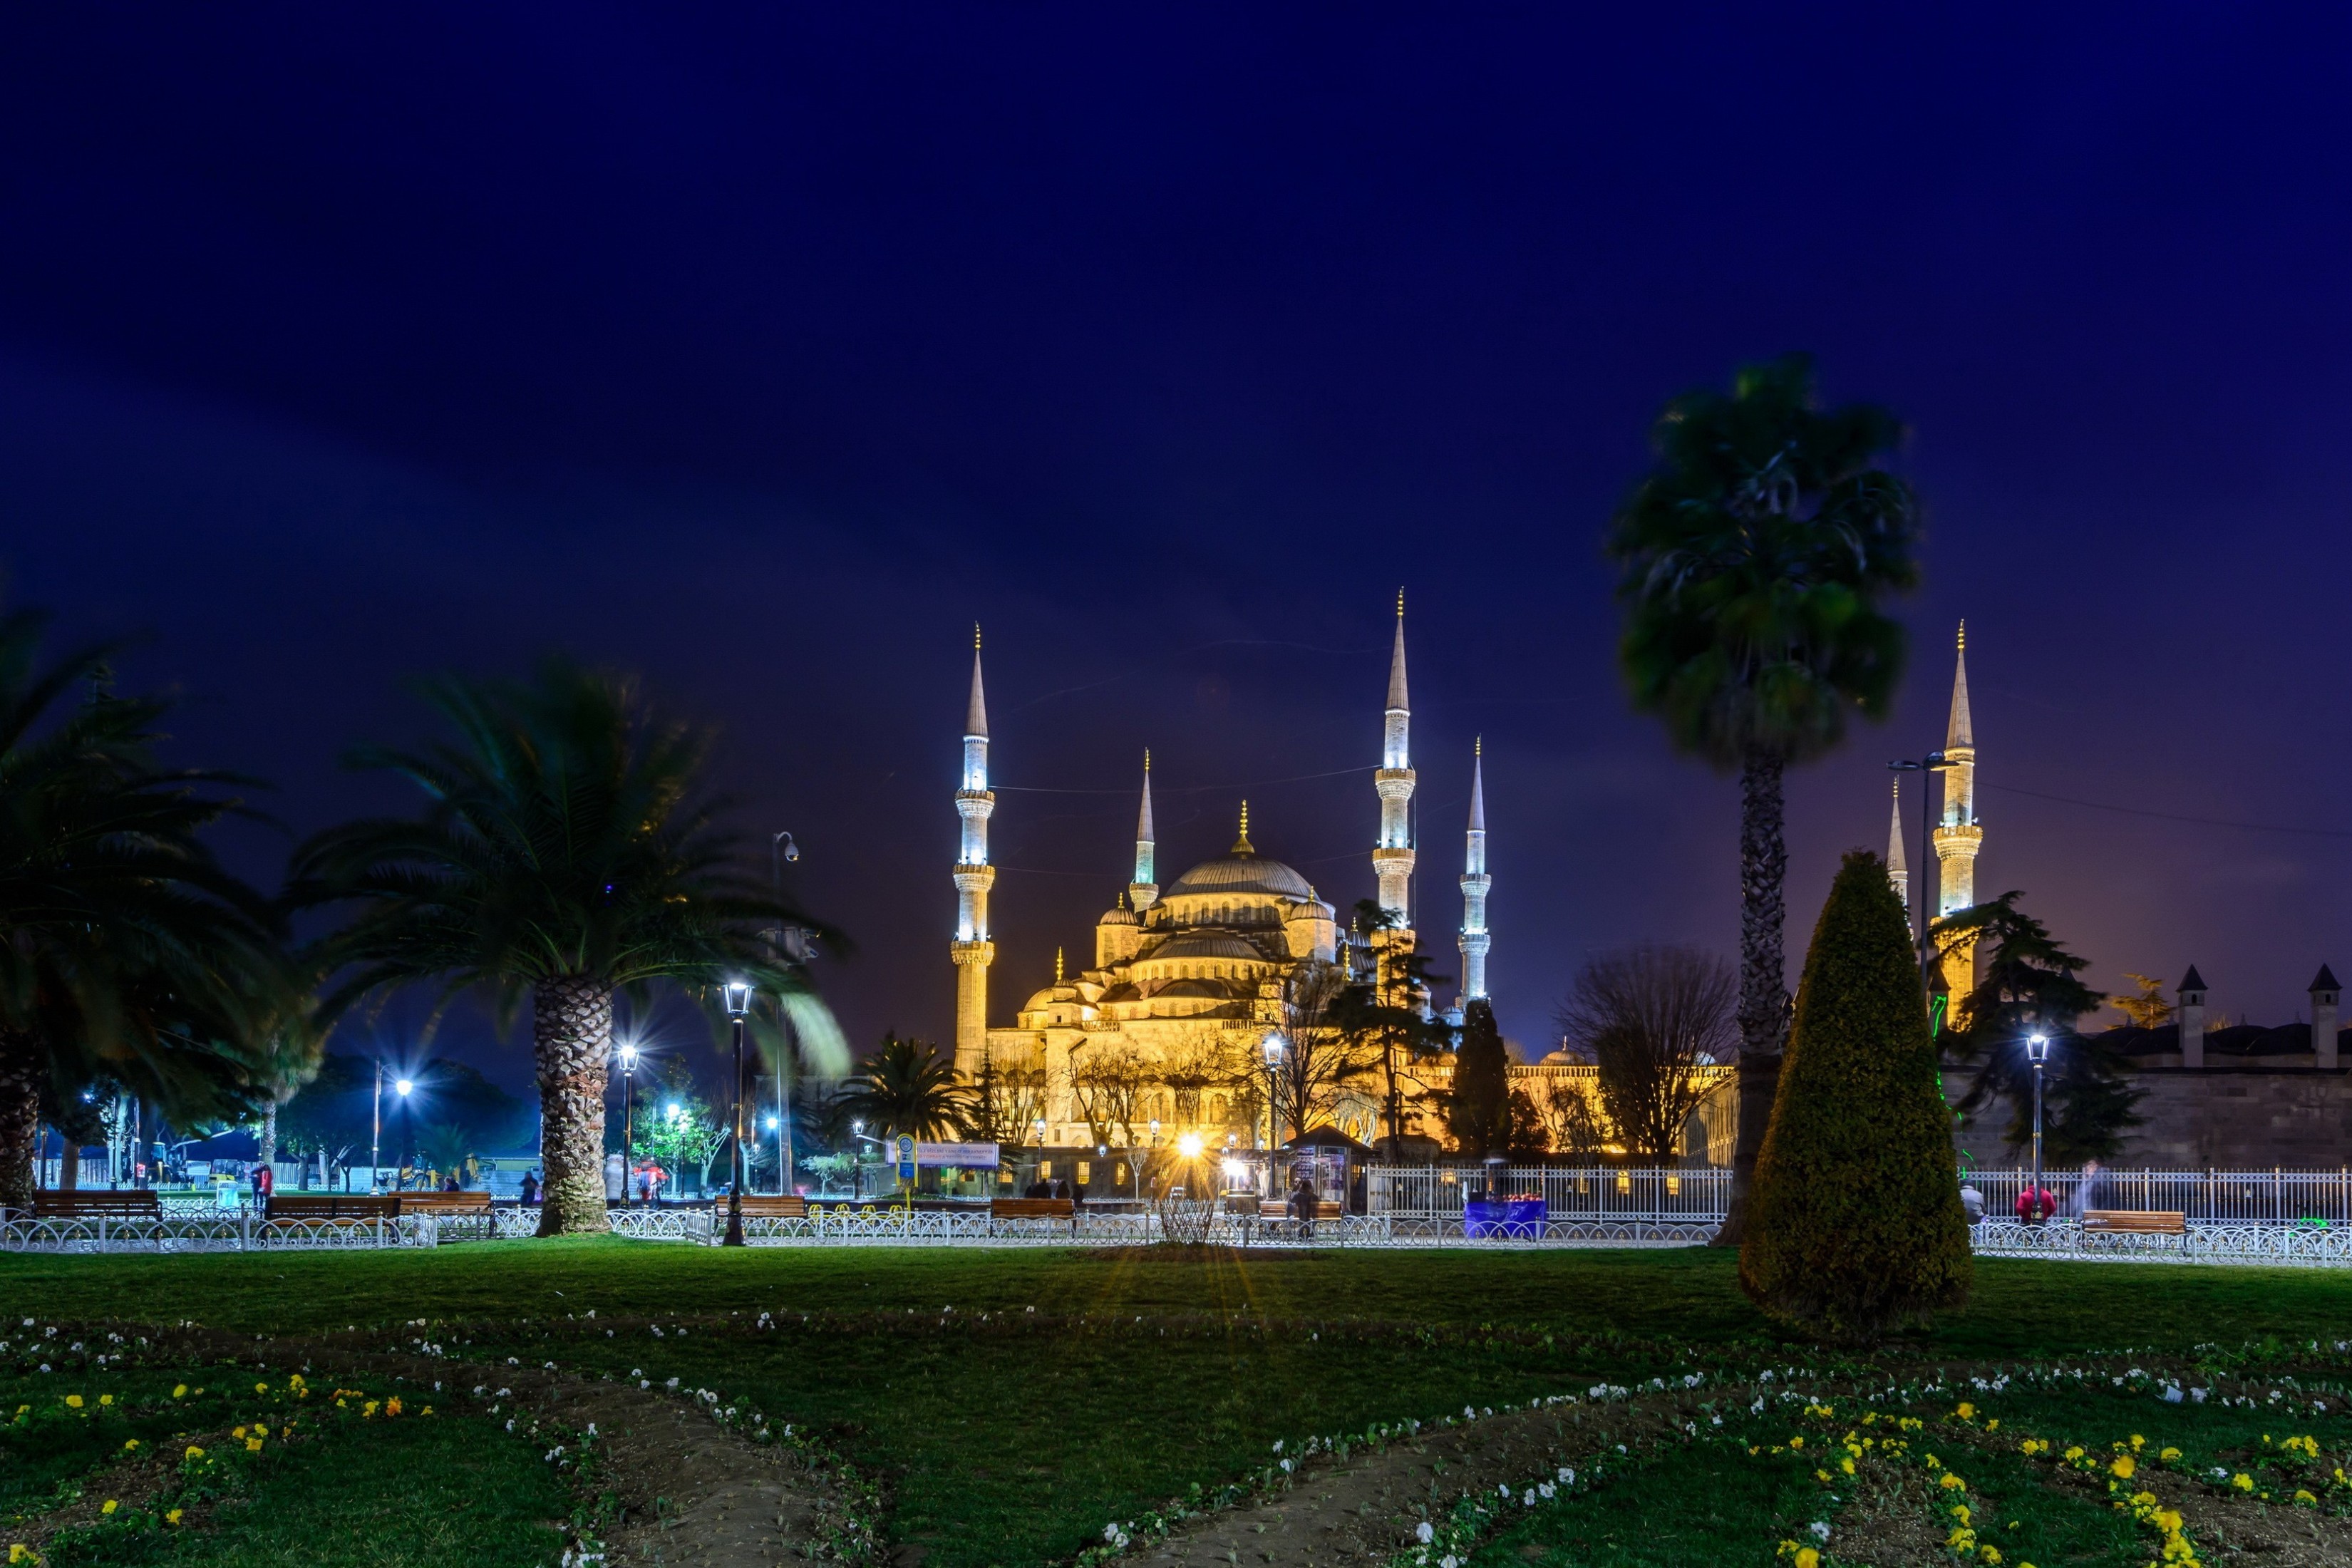 vertical wallpaper sultan ahmed mosque, mosque, turkey, religious, istanbul, mosques